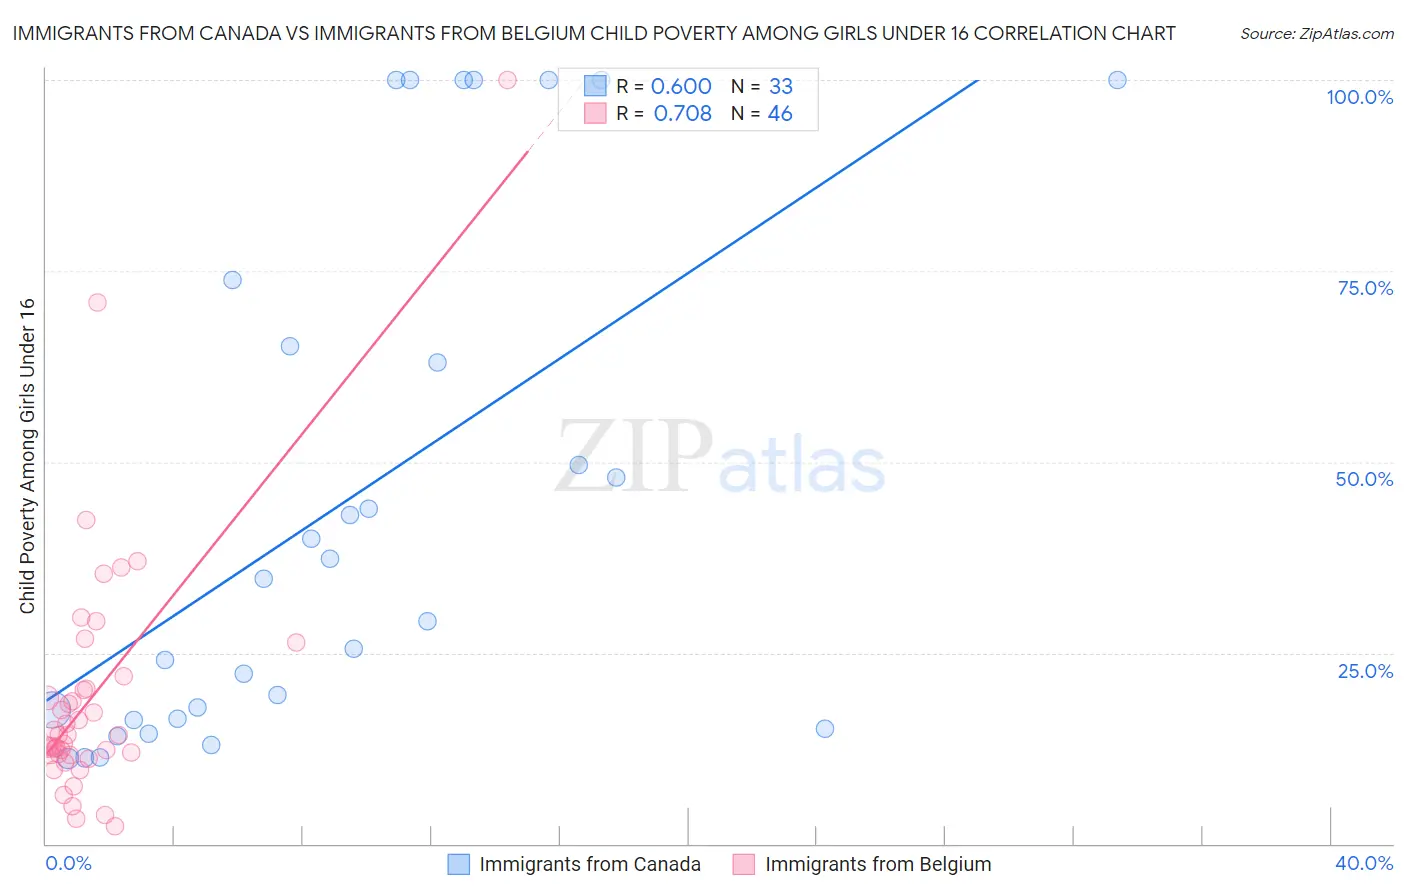 Immigrants from Canada vs Immigrants from Belgium Child Poverty Among Girls Under 16